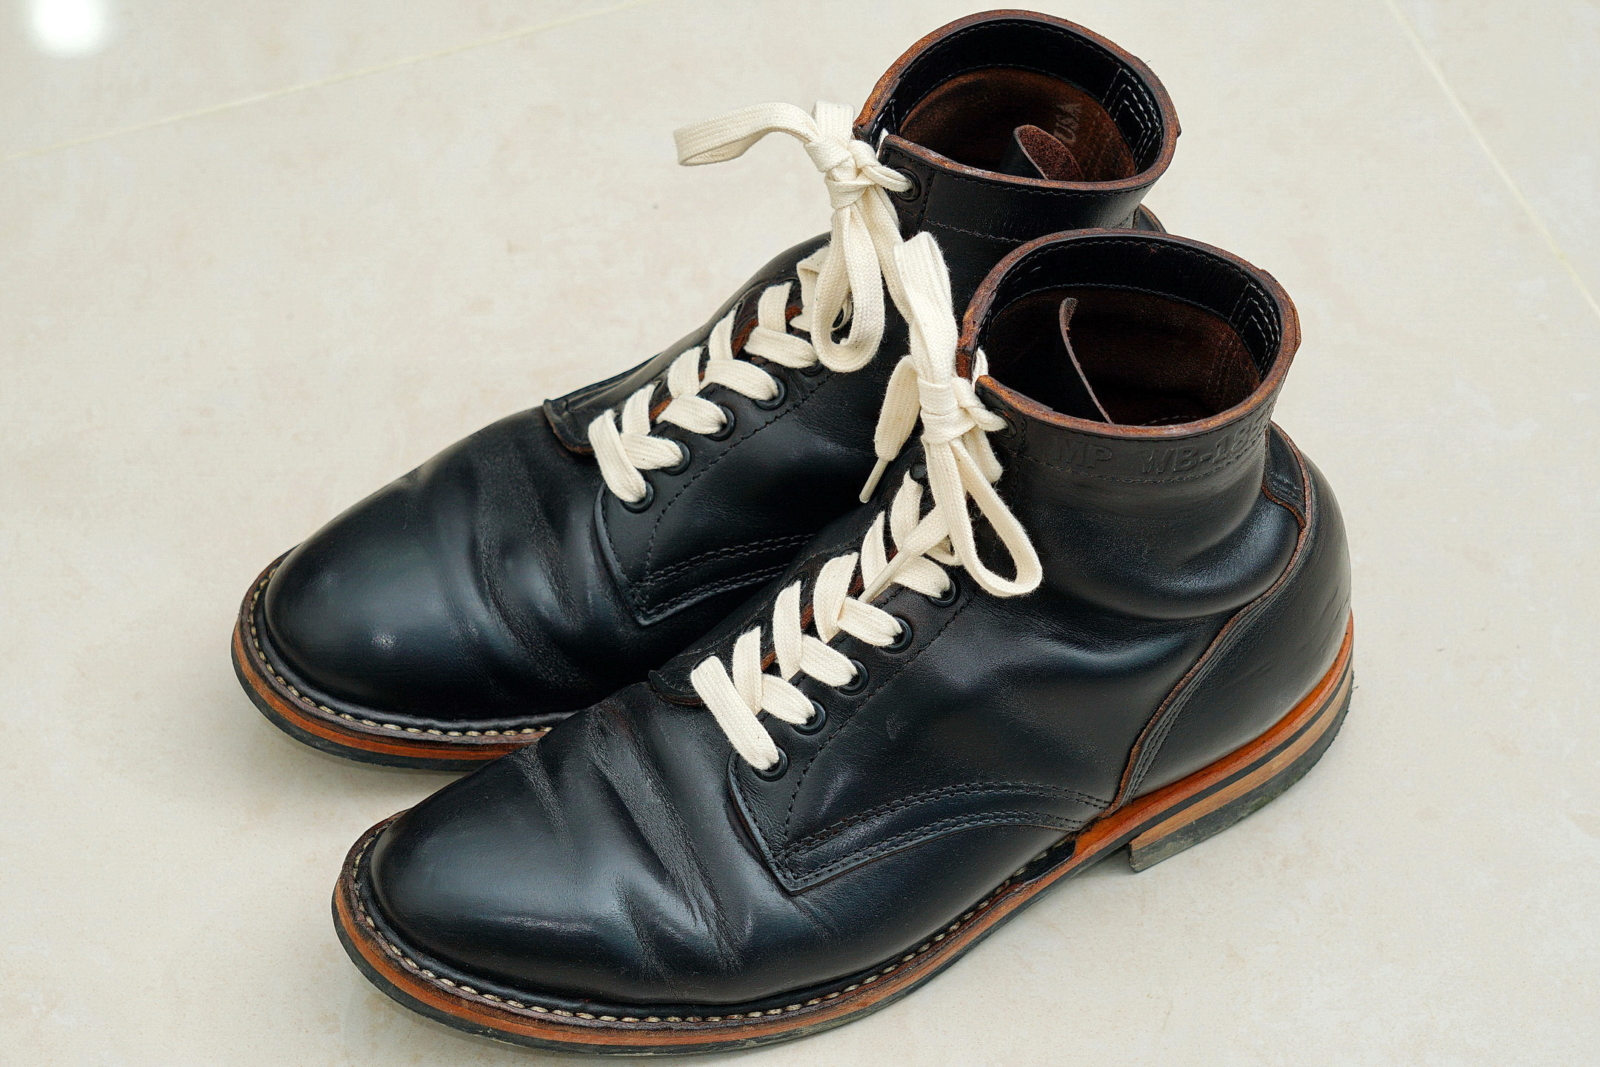 White's MP Service Boots 5Inches Horween CXL BLK 軍警靴，外觀2